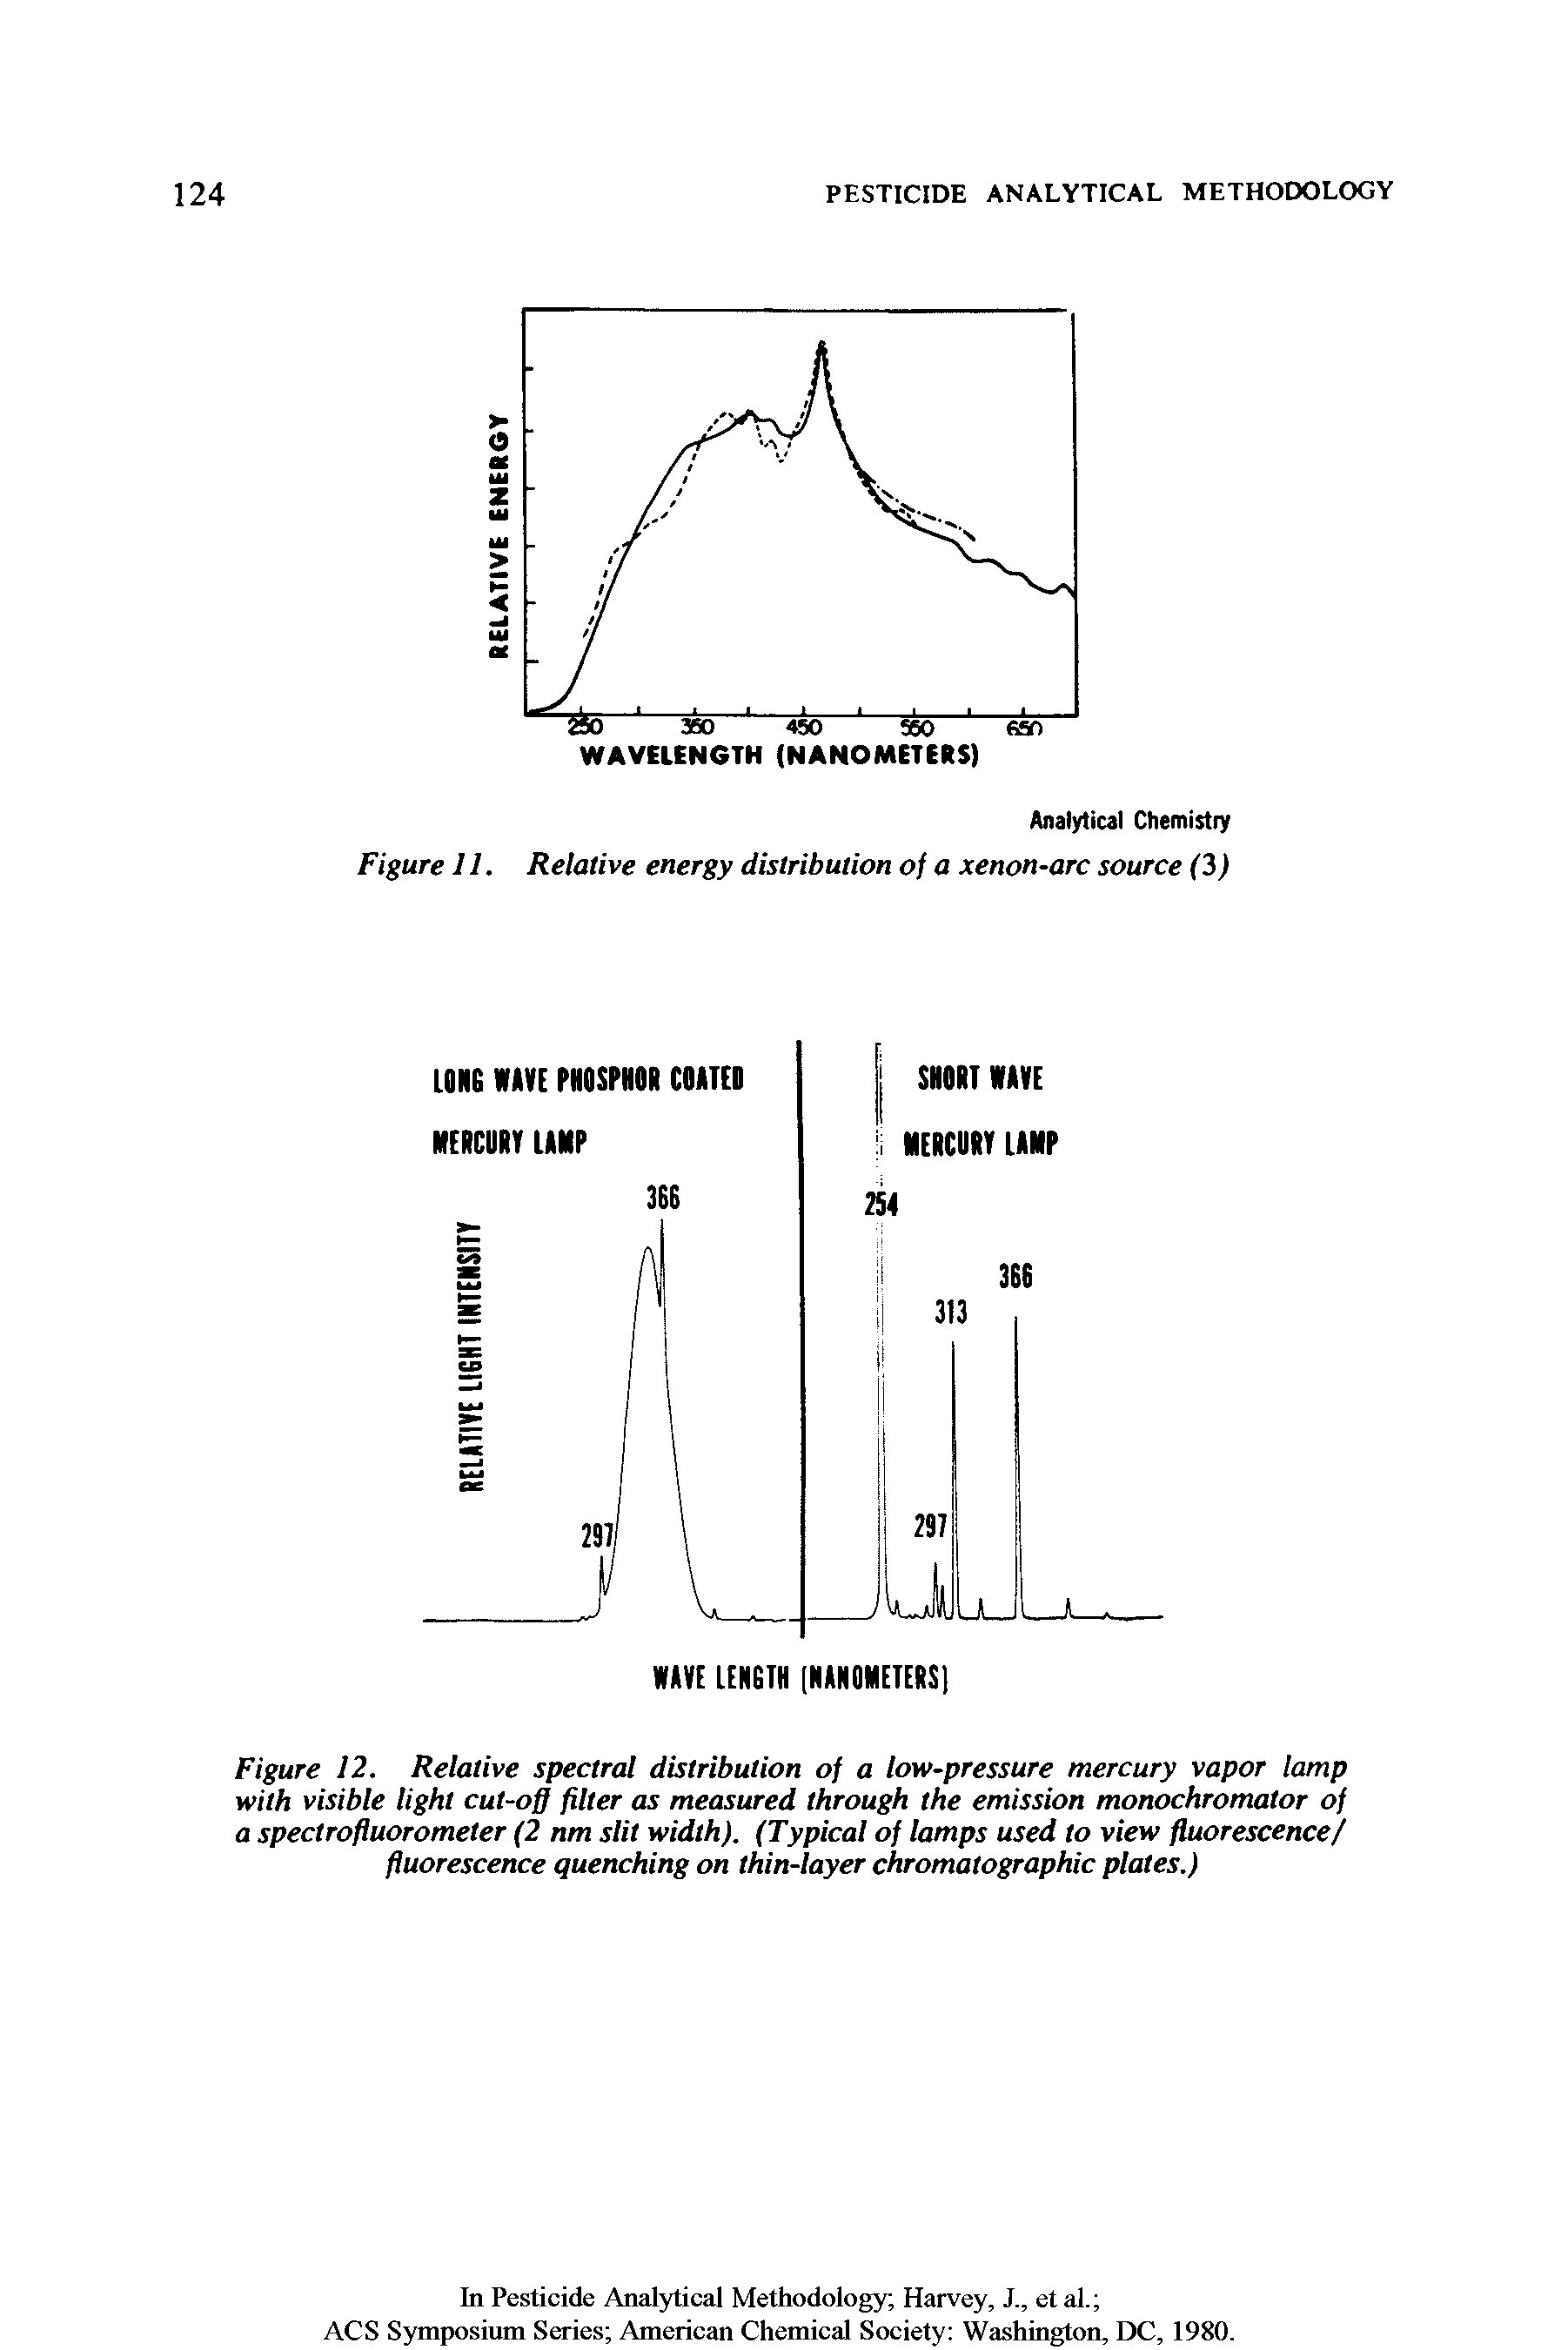 Figure 12. Relative spectral distribution of a low-pressure mercury vapor lamp with visible light cut-off filter as measured through the emission monochromator of a spectrofluorometer (2 nm slit width). (Typical of lamps used to view fluorescence/ fluorescence quenching on thin-layer chromatographic plates.)...